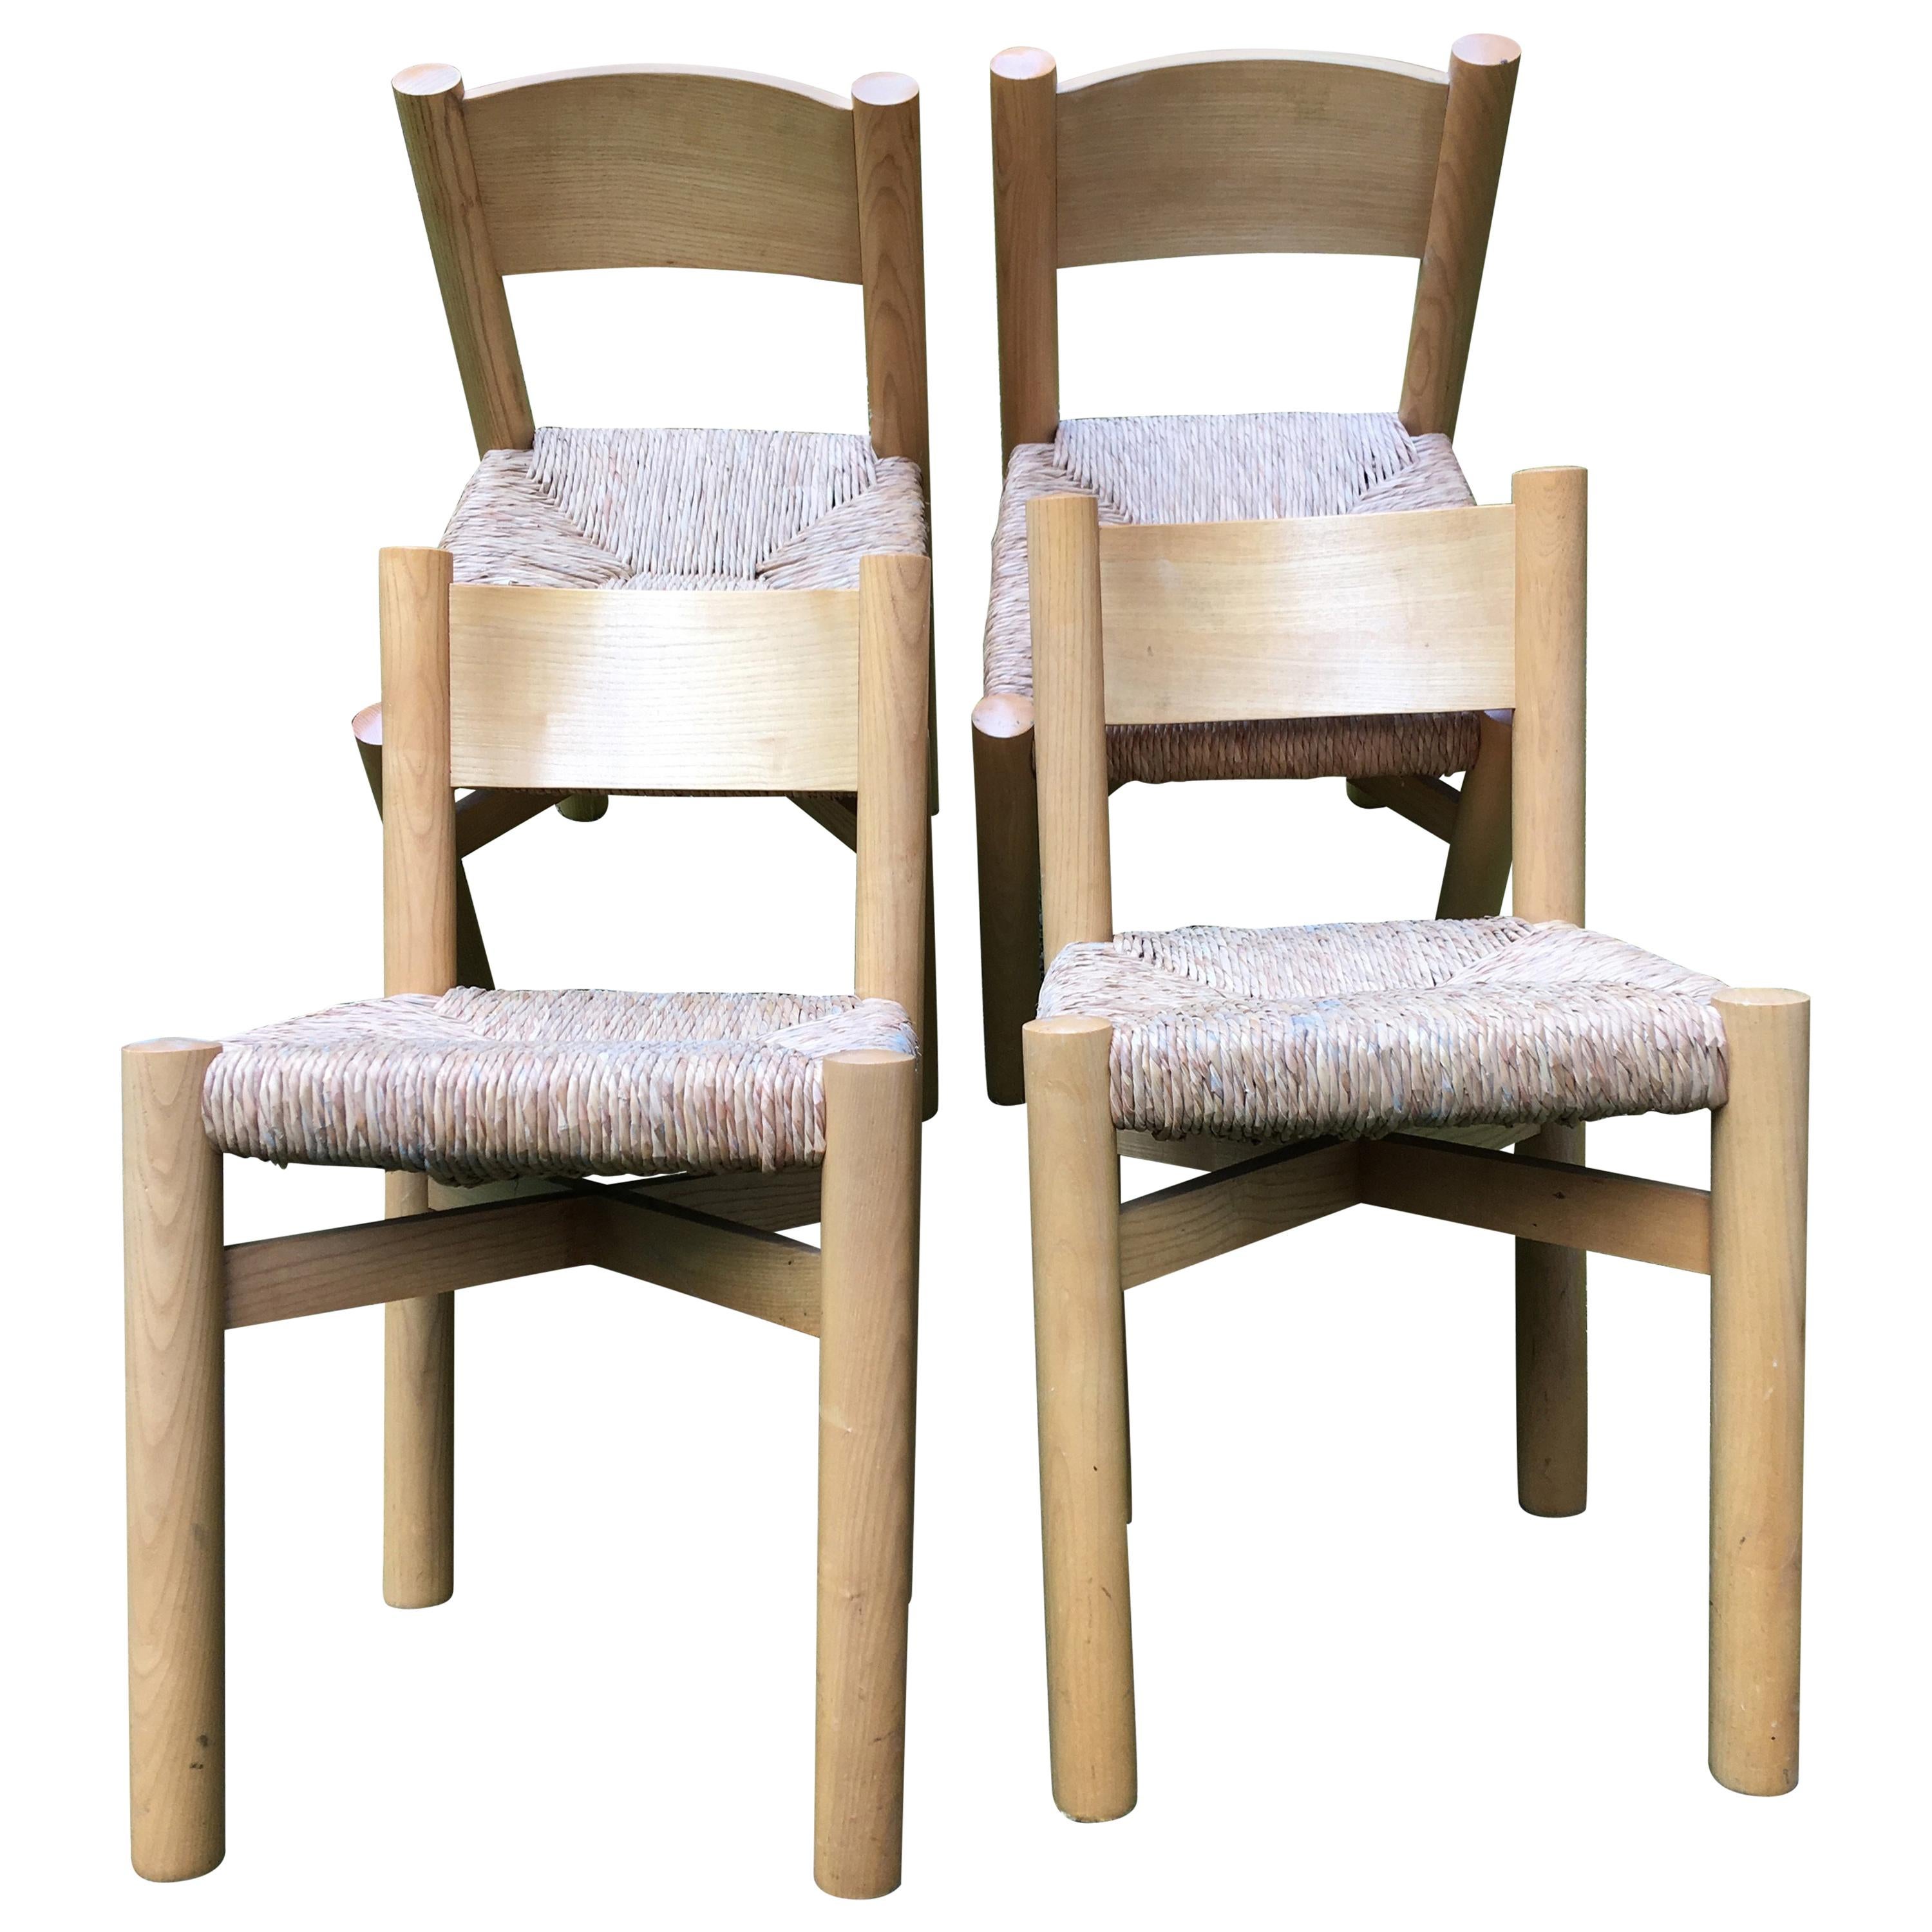 Set of Four "Meribel" Chairs by Charlotte Perriand